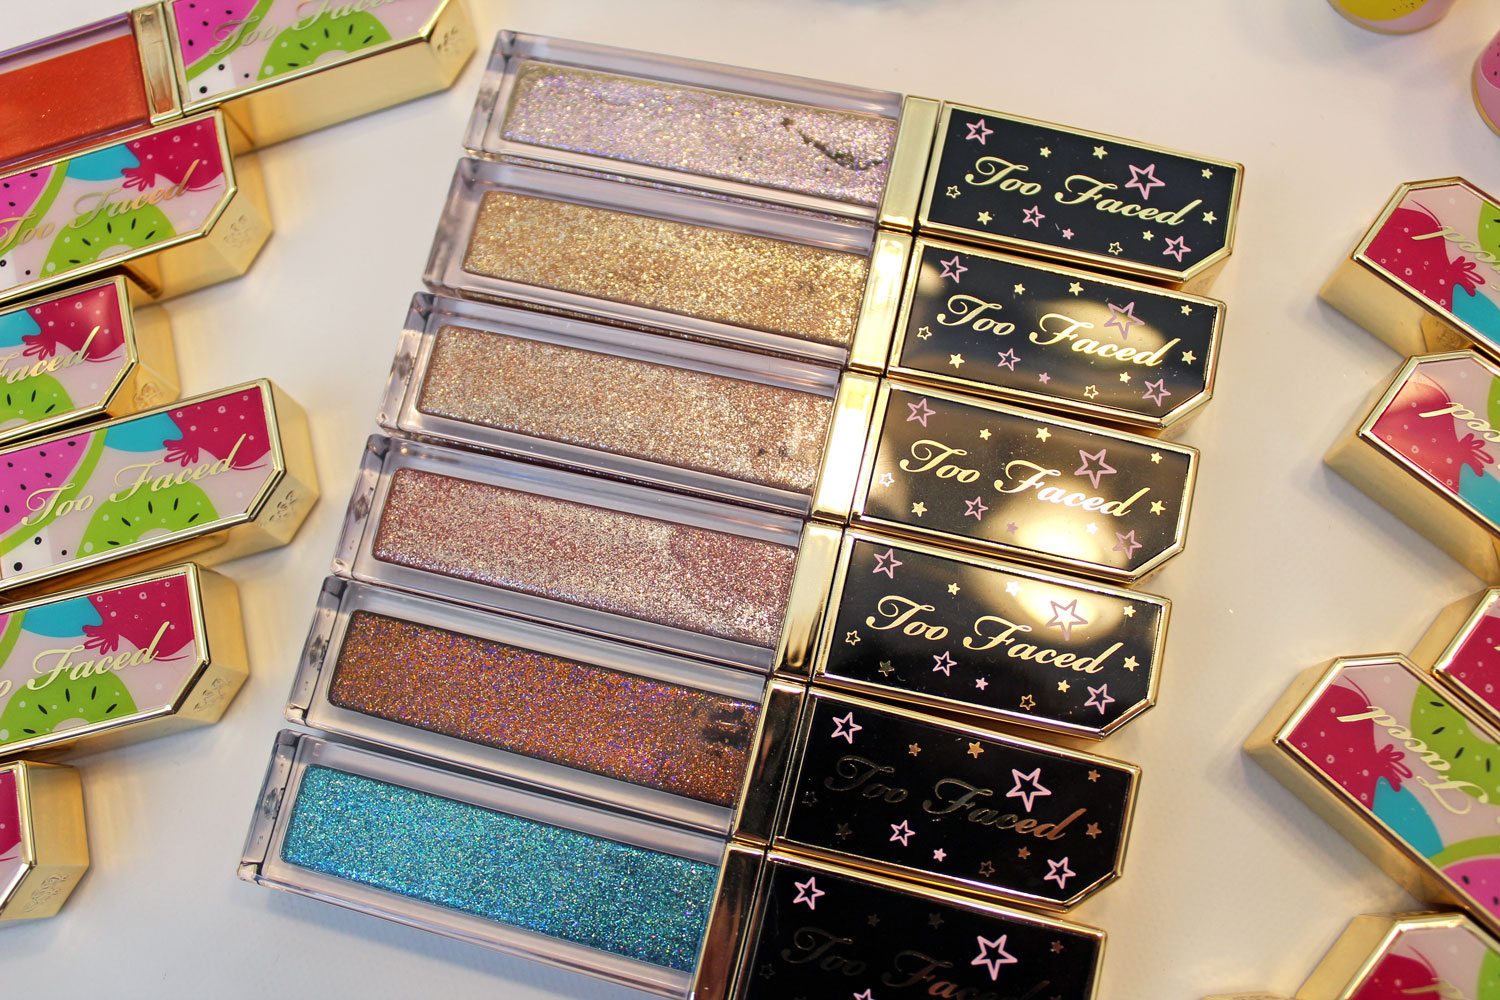 Too Faced Tutti Frutti Twinkle Twinkle Liquid Glitter Review and Swatches by My Beauty Bunny